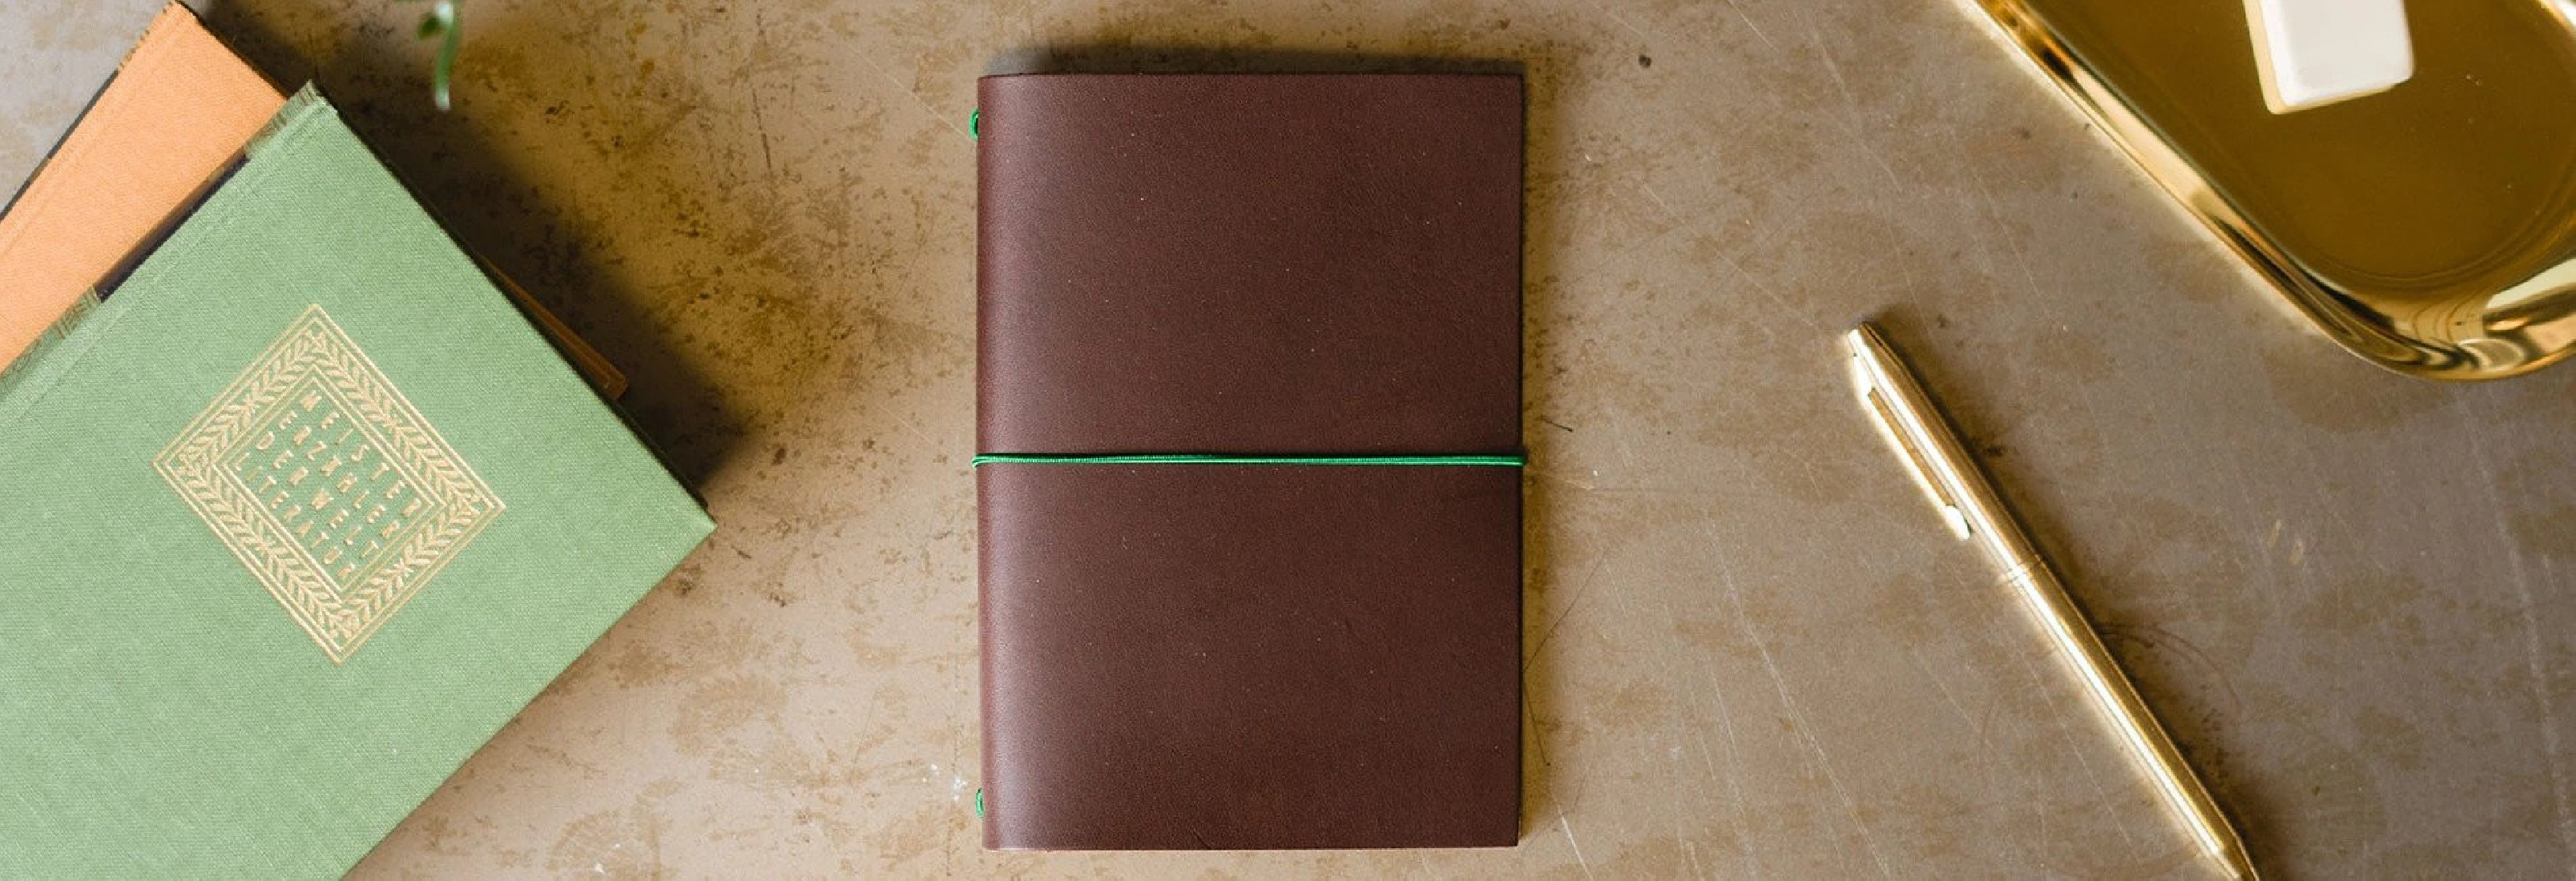 Paper Republic the writers essentials pocket chestnut  leather journal kit